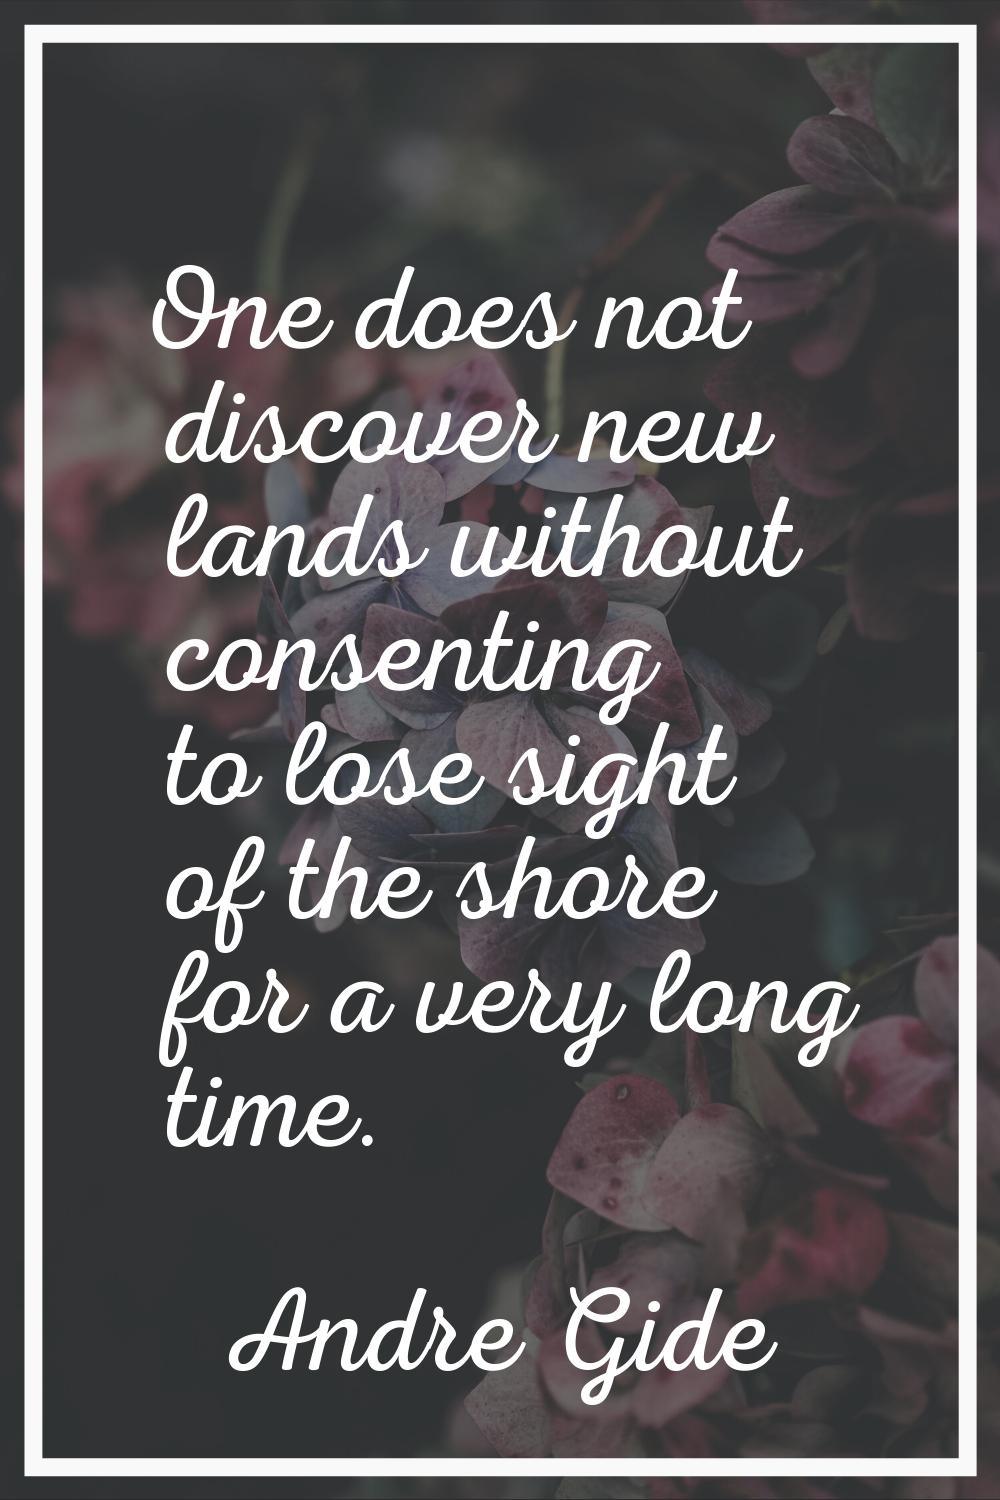 One does not discover new lands without consenting to lose sight of the shore for a very long time.